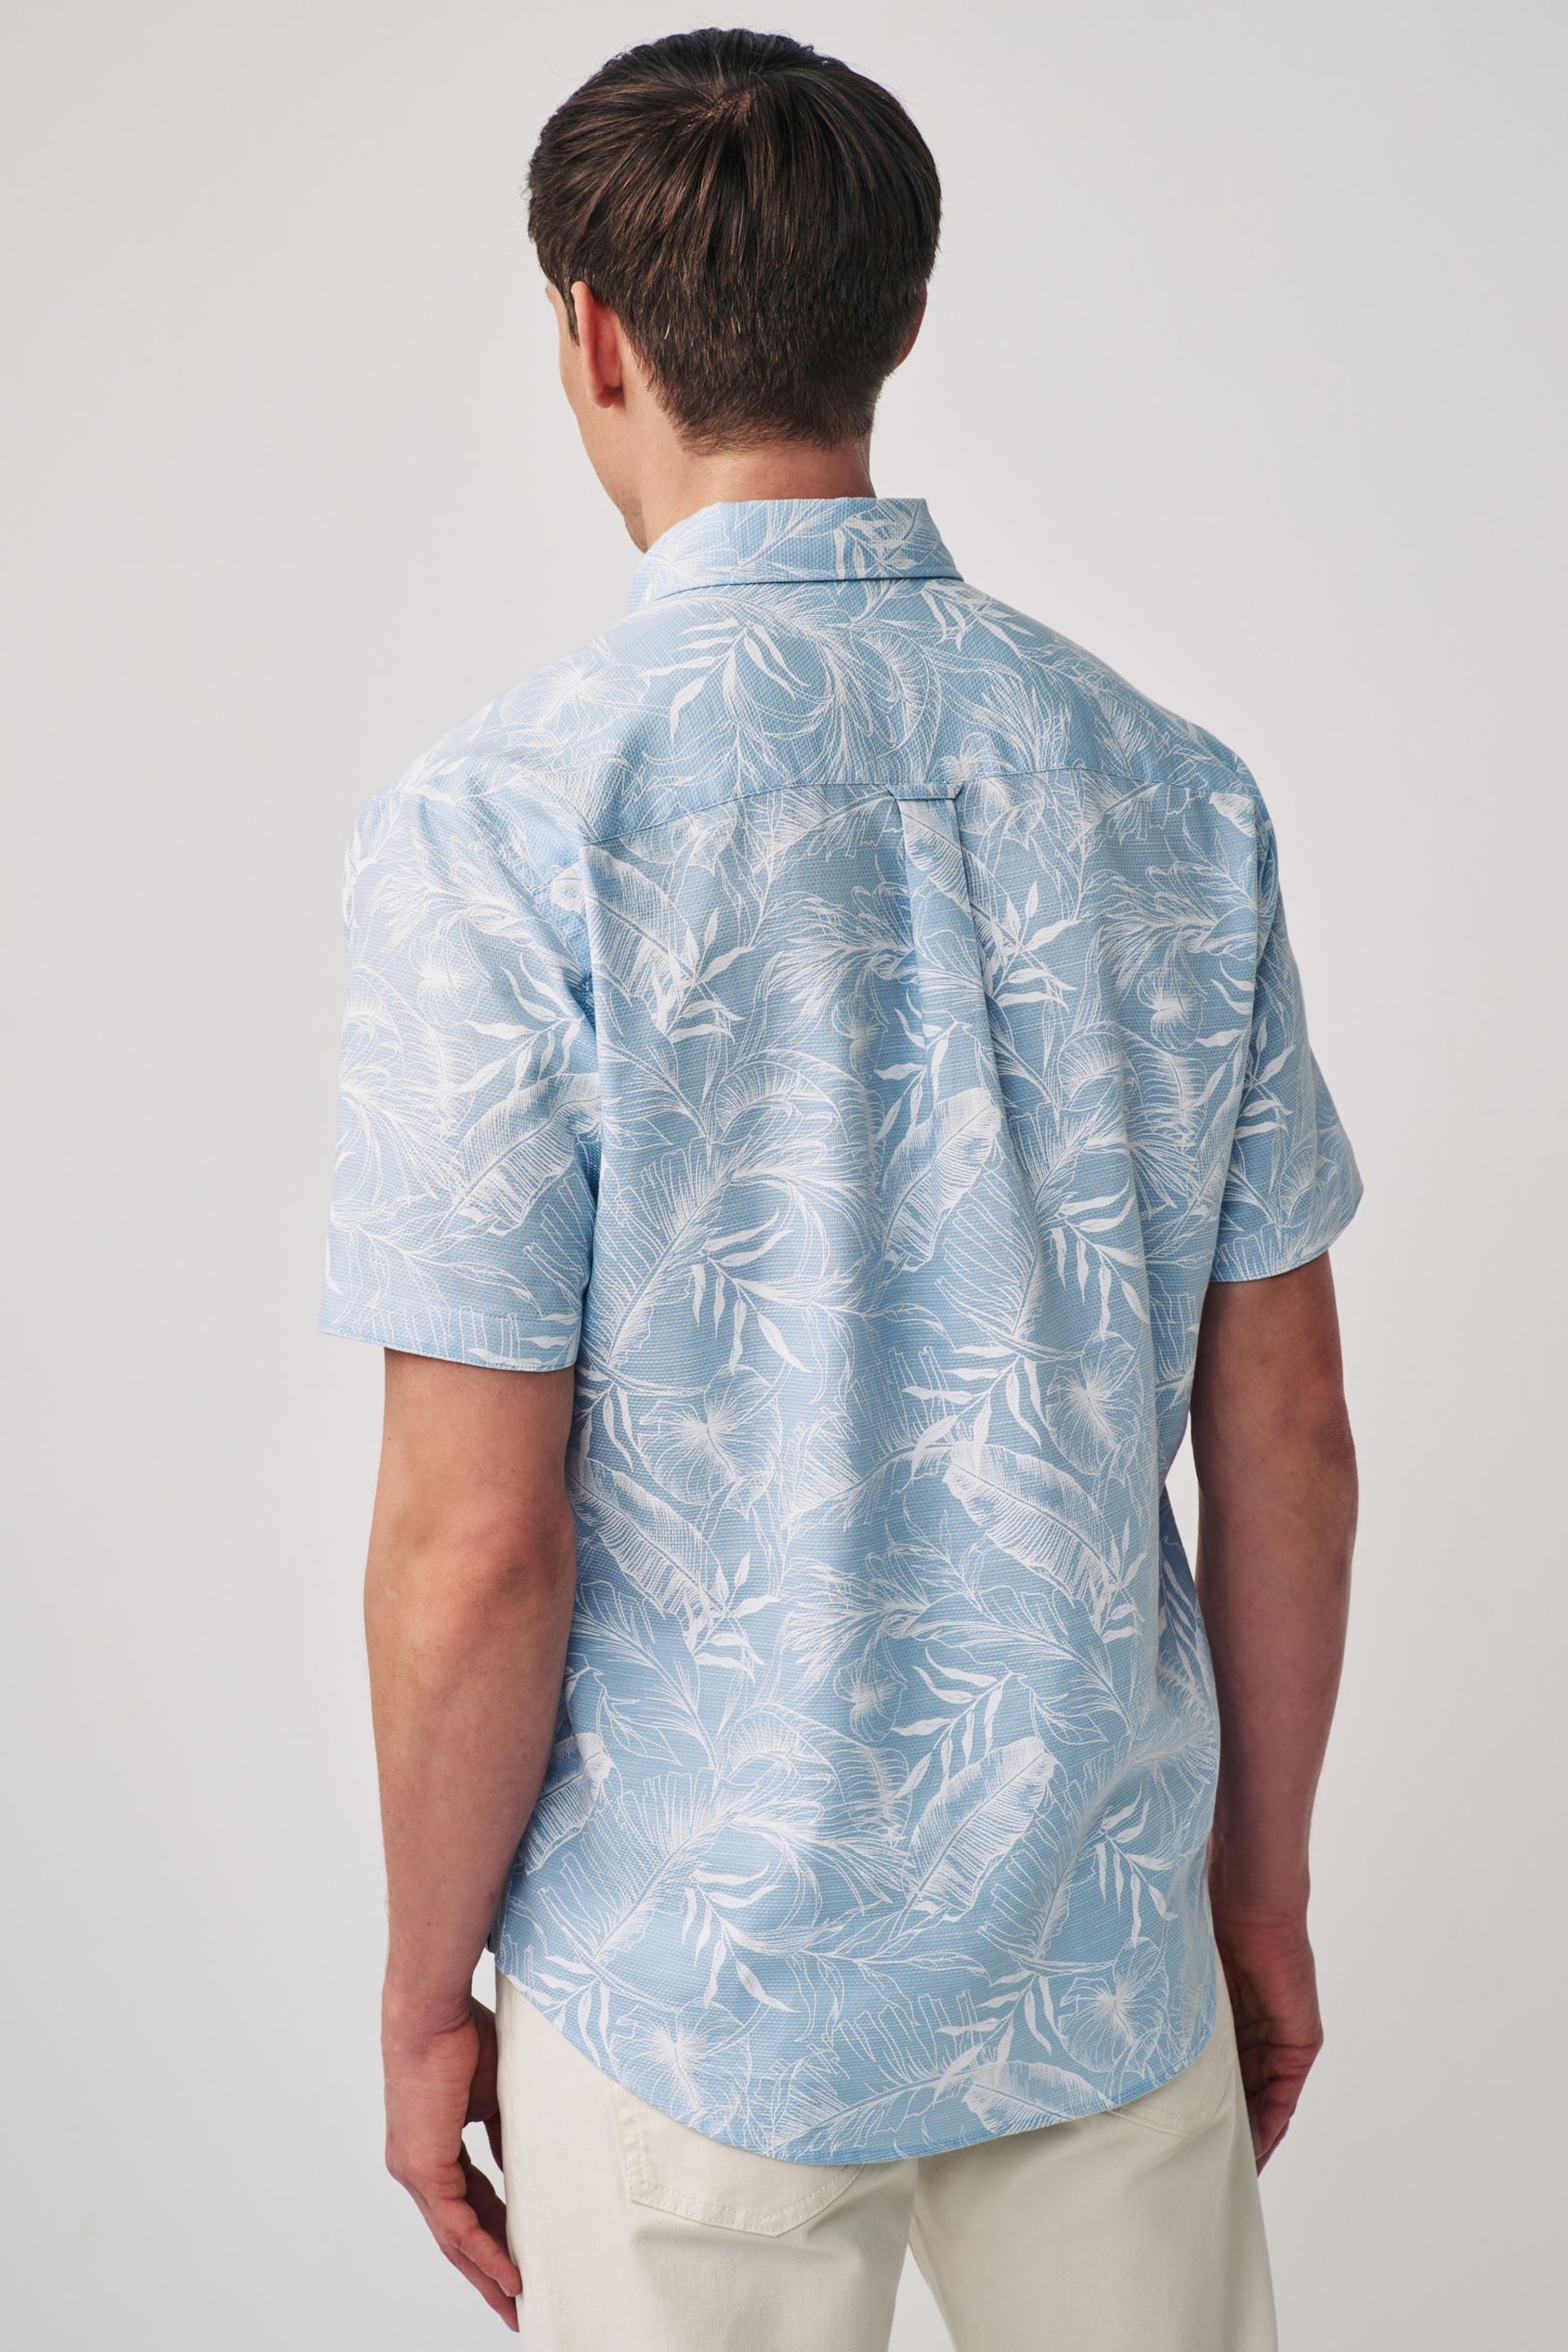 Blue Textured Floral Short Sleeve Shirt - Image 4 of 7